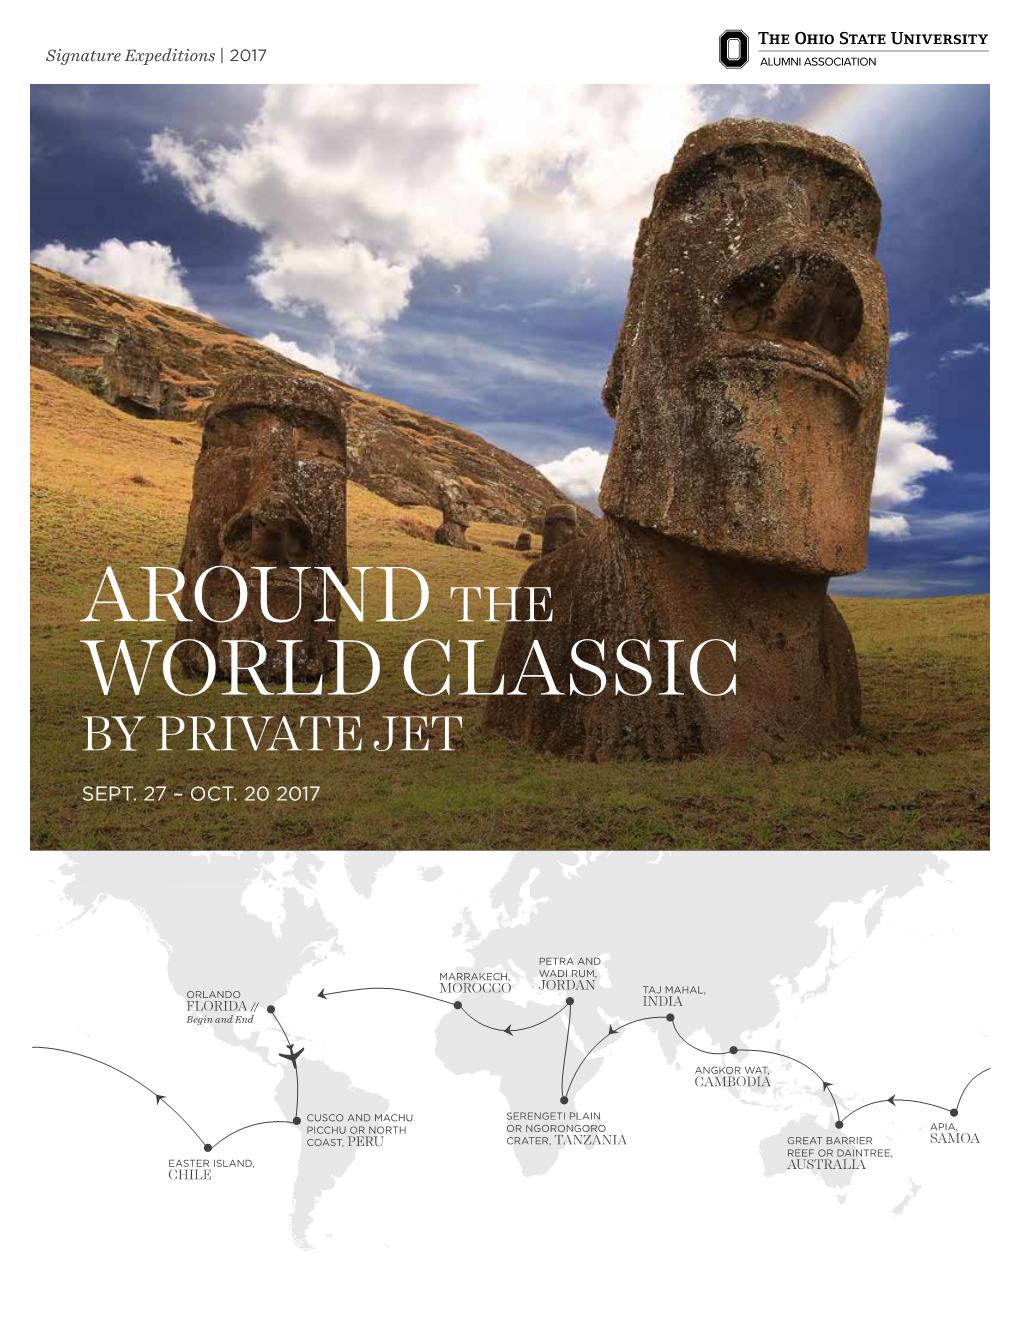 Around the World Classic by Private Jet Sept